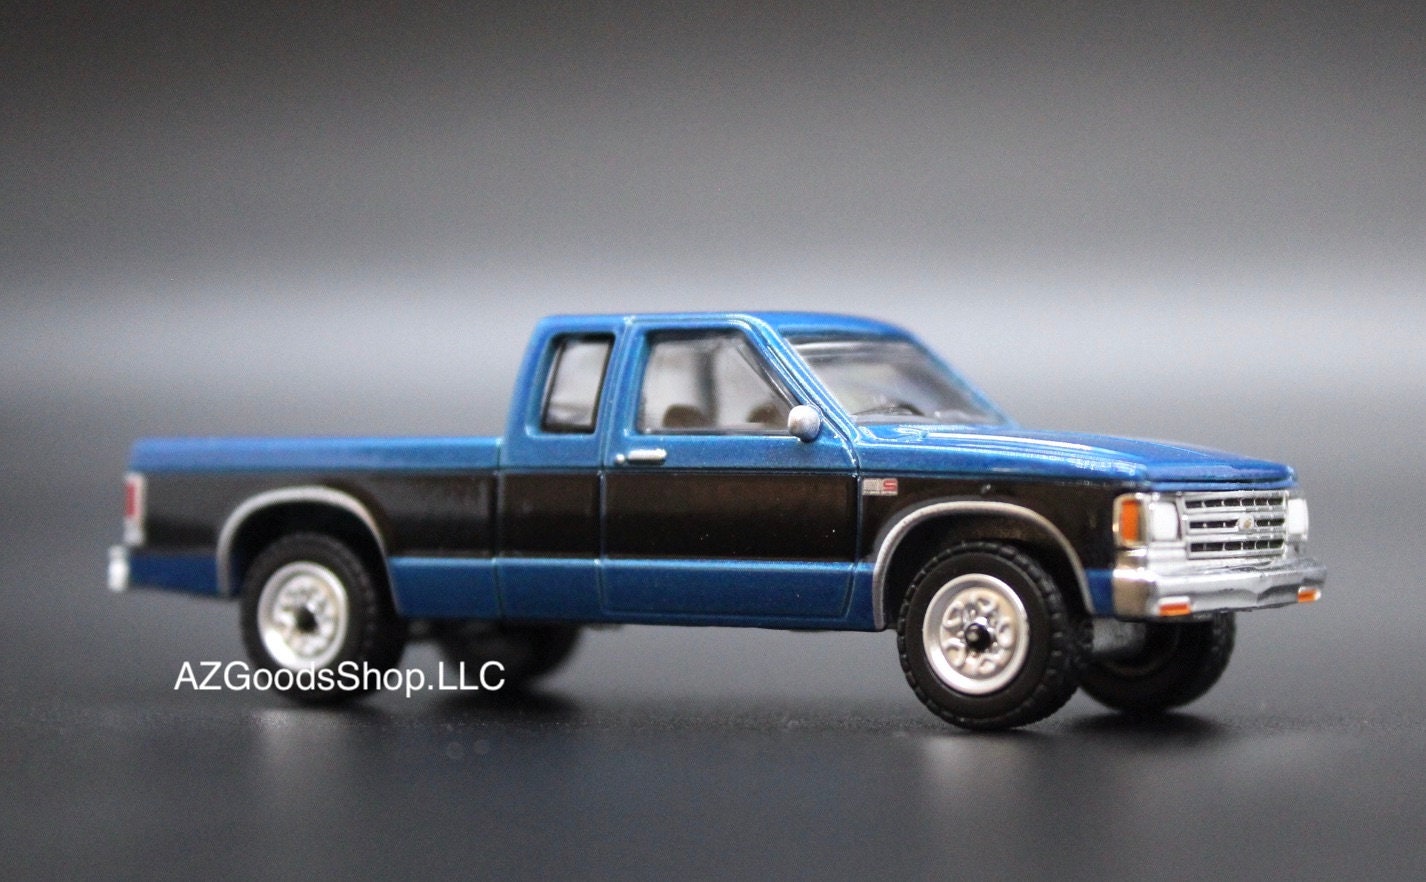 1988 Chevy S-10 Black Pickup Truck Off Road 1:64 Diecast Model Blackout 